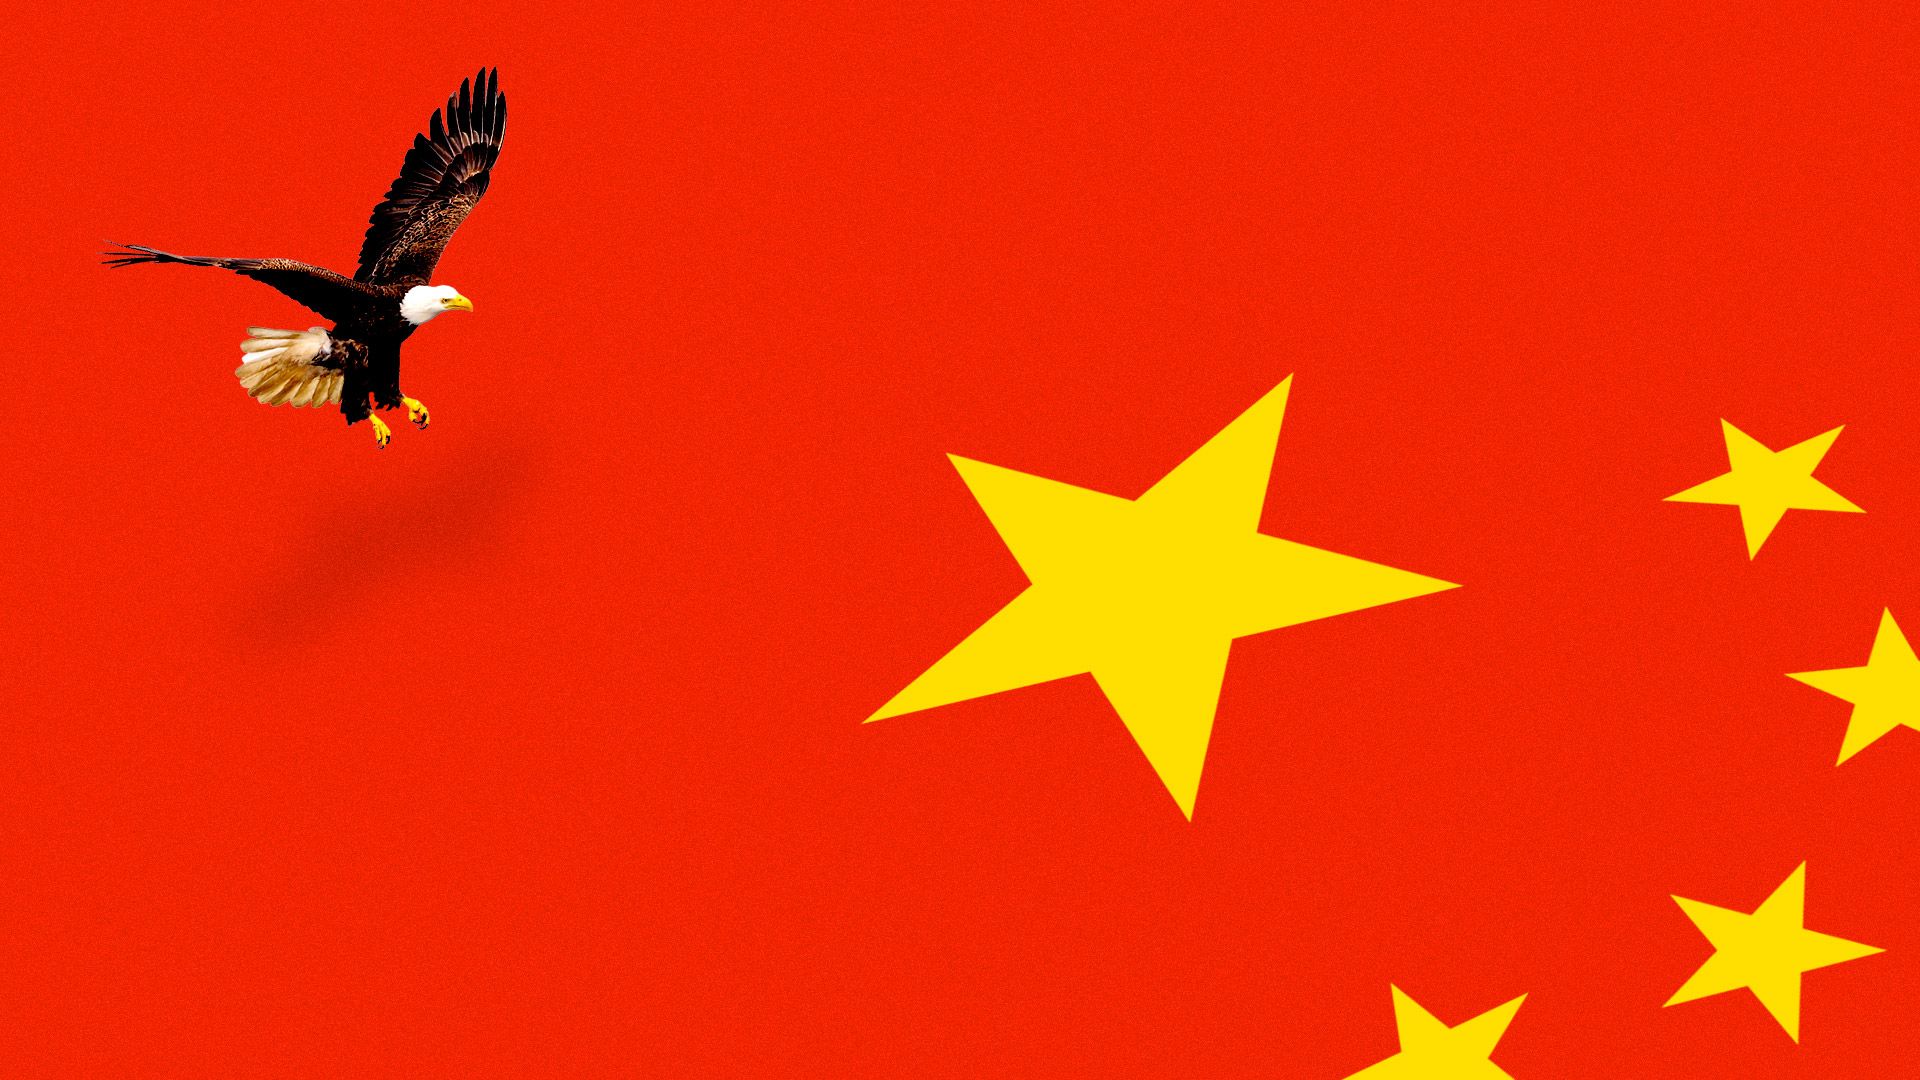 In this illustration, a bald eagle flies over the Chinese flag.